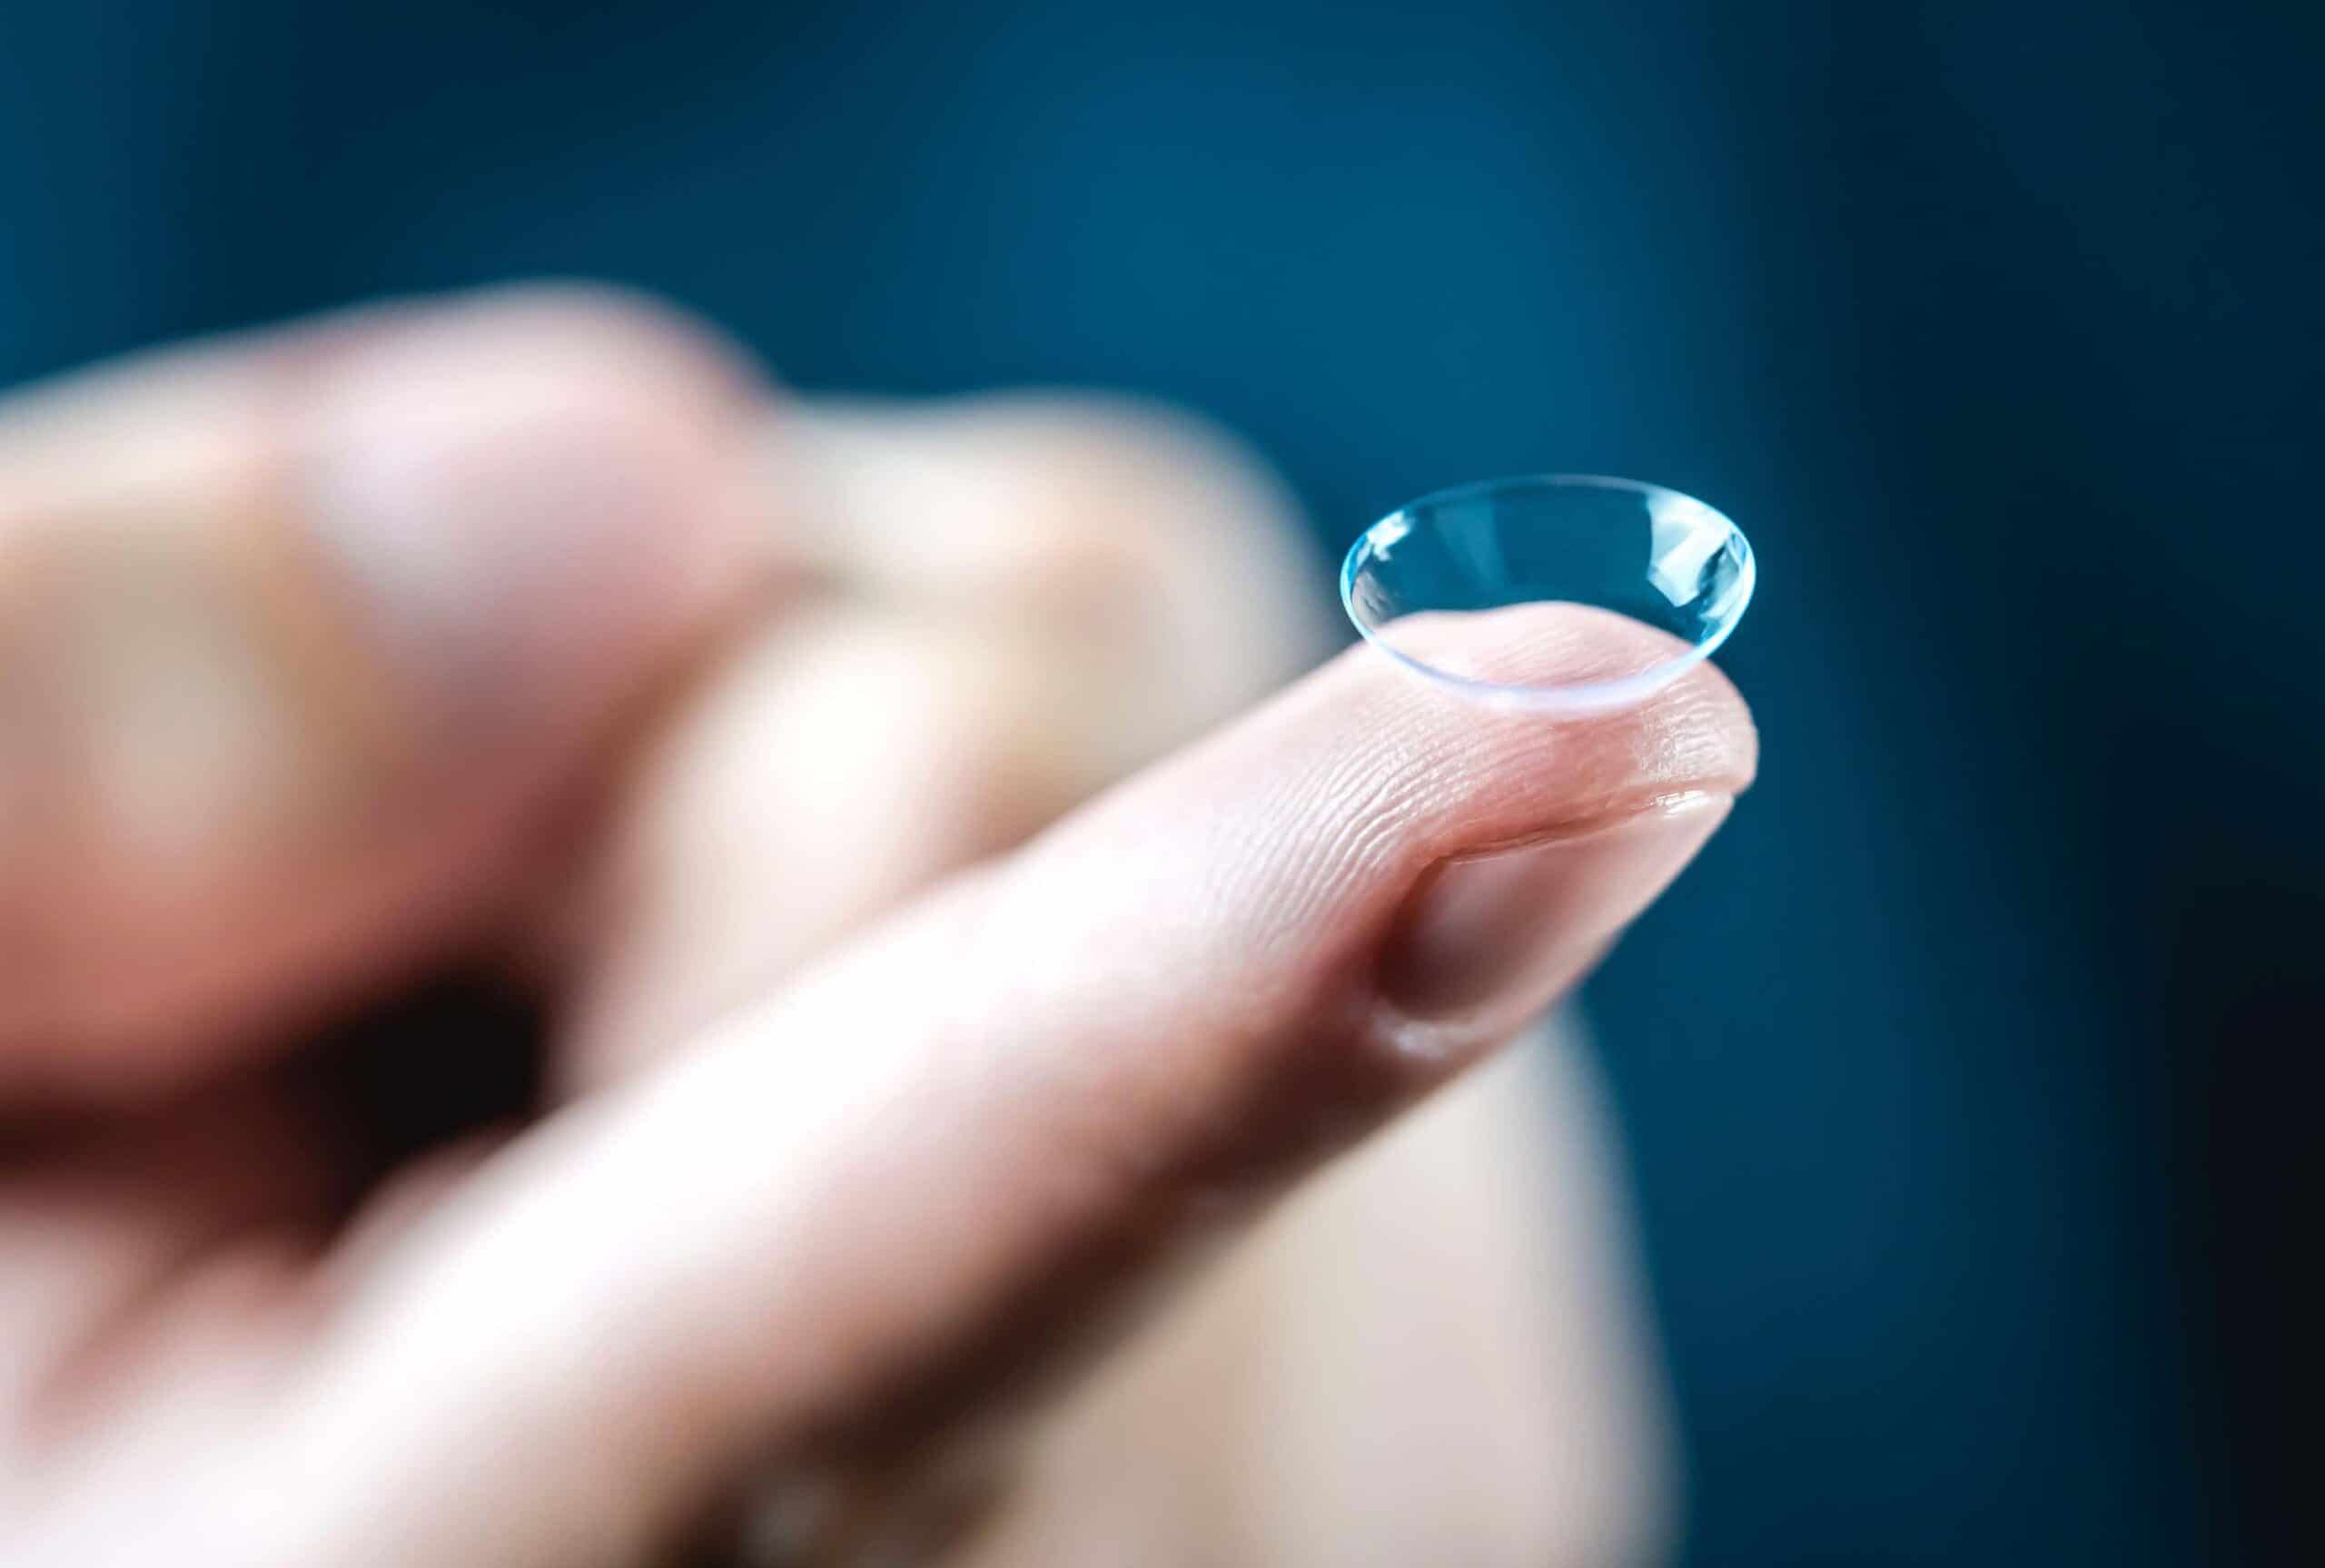 What you should consider first when getting contact lenses